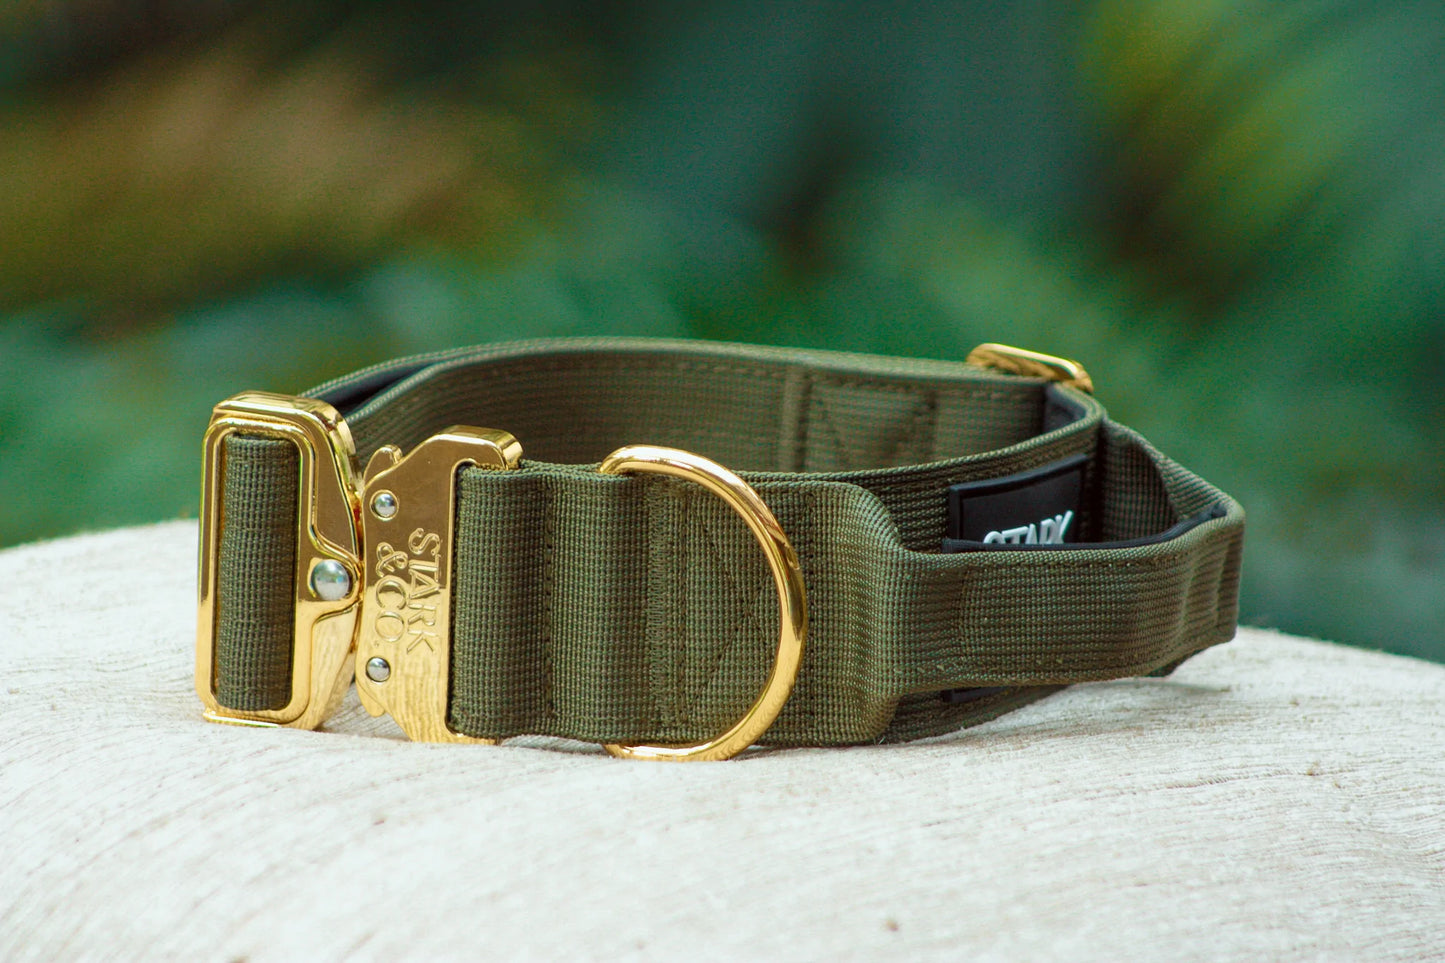 5cm Warrior City Military Green with AirTag pocket